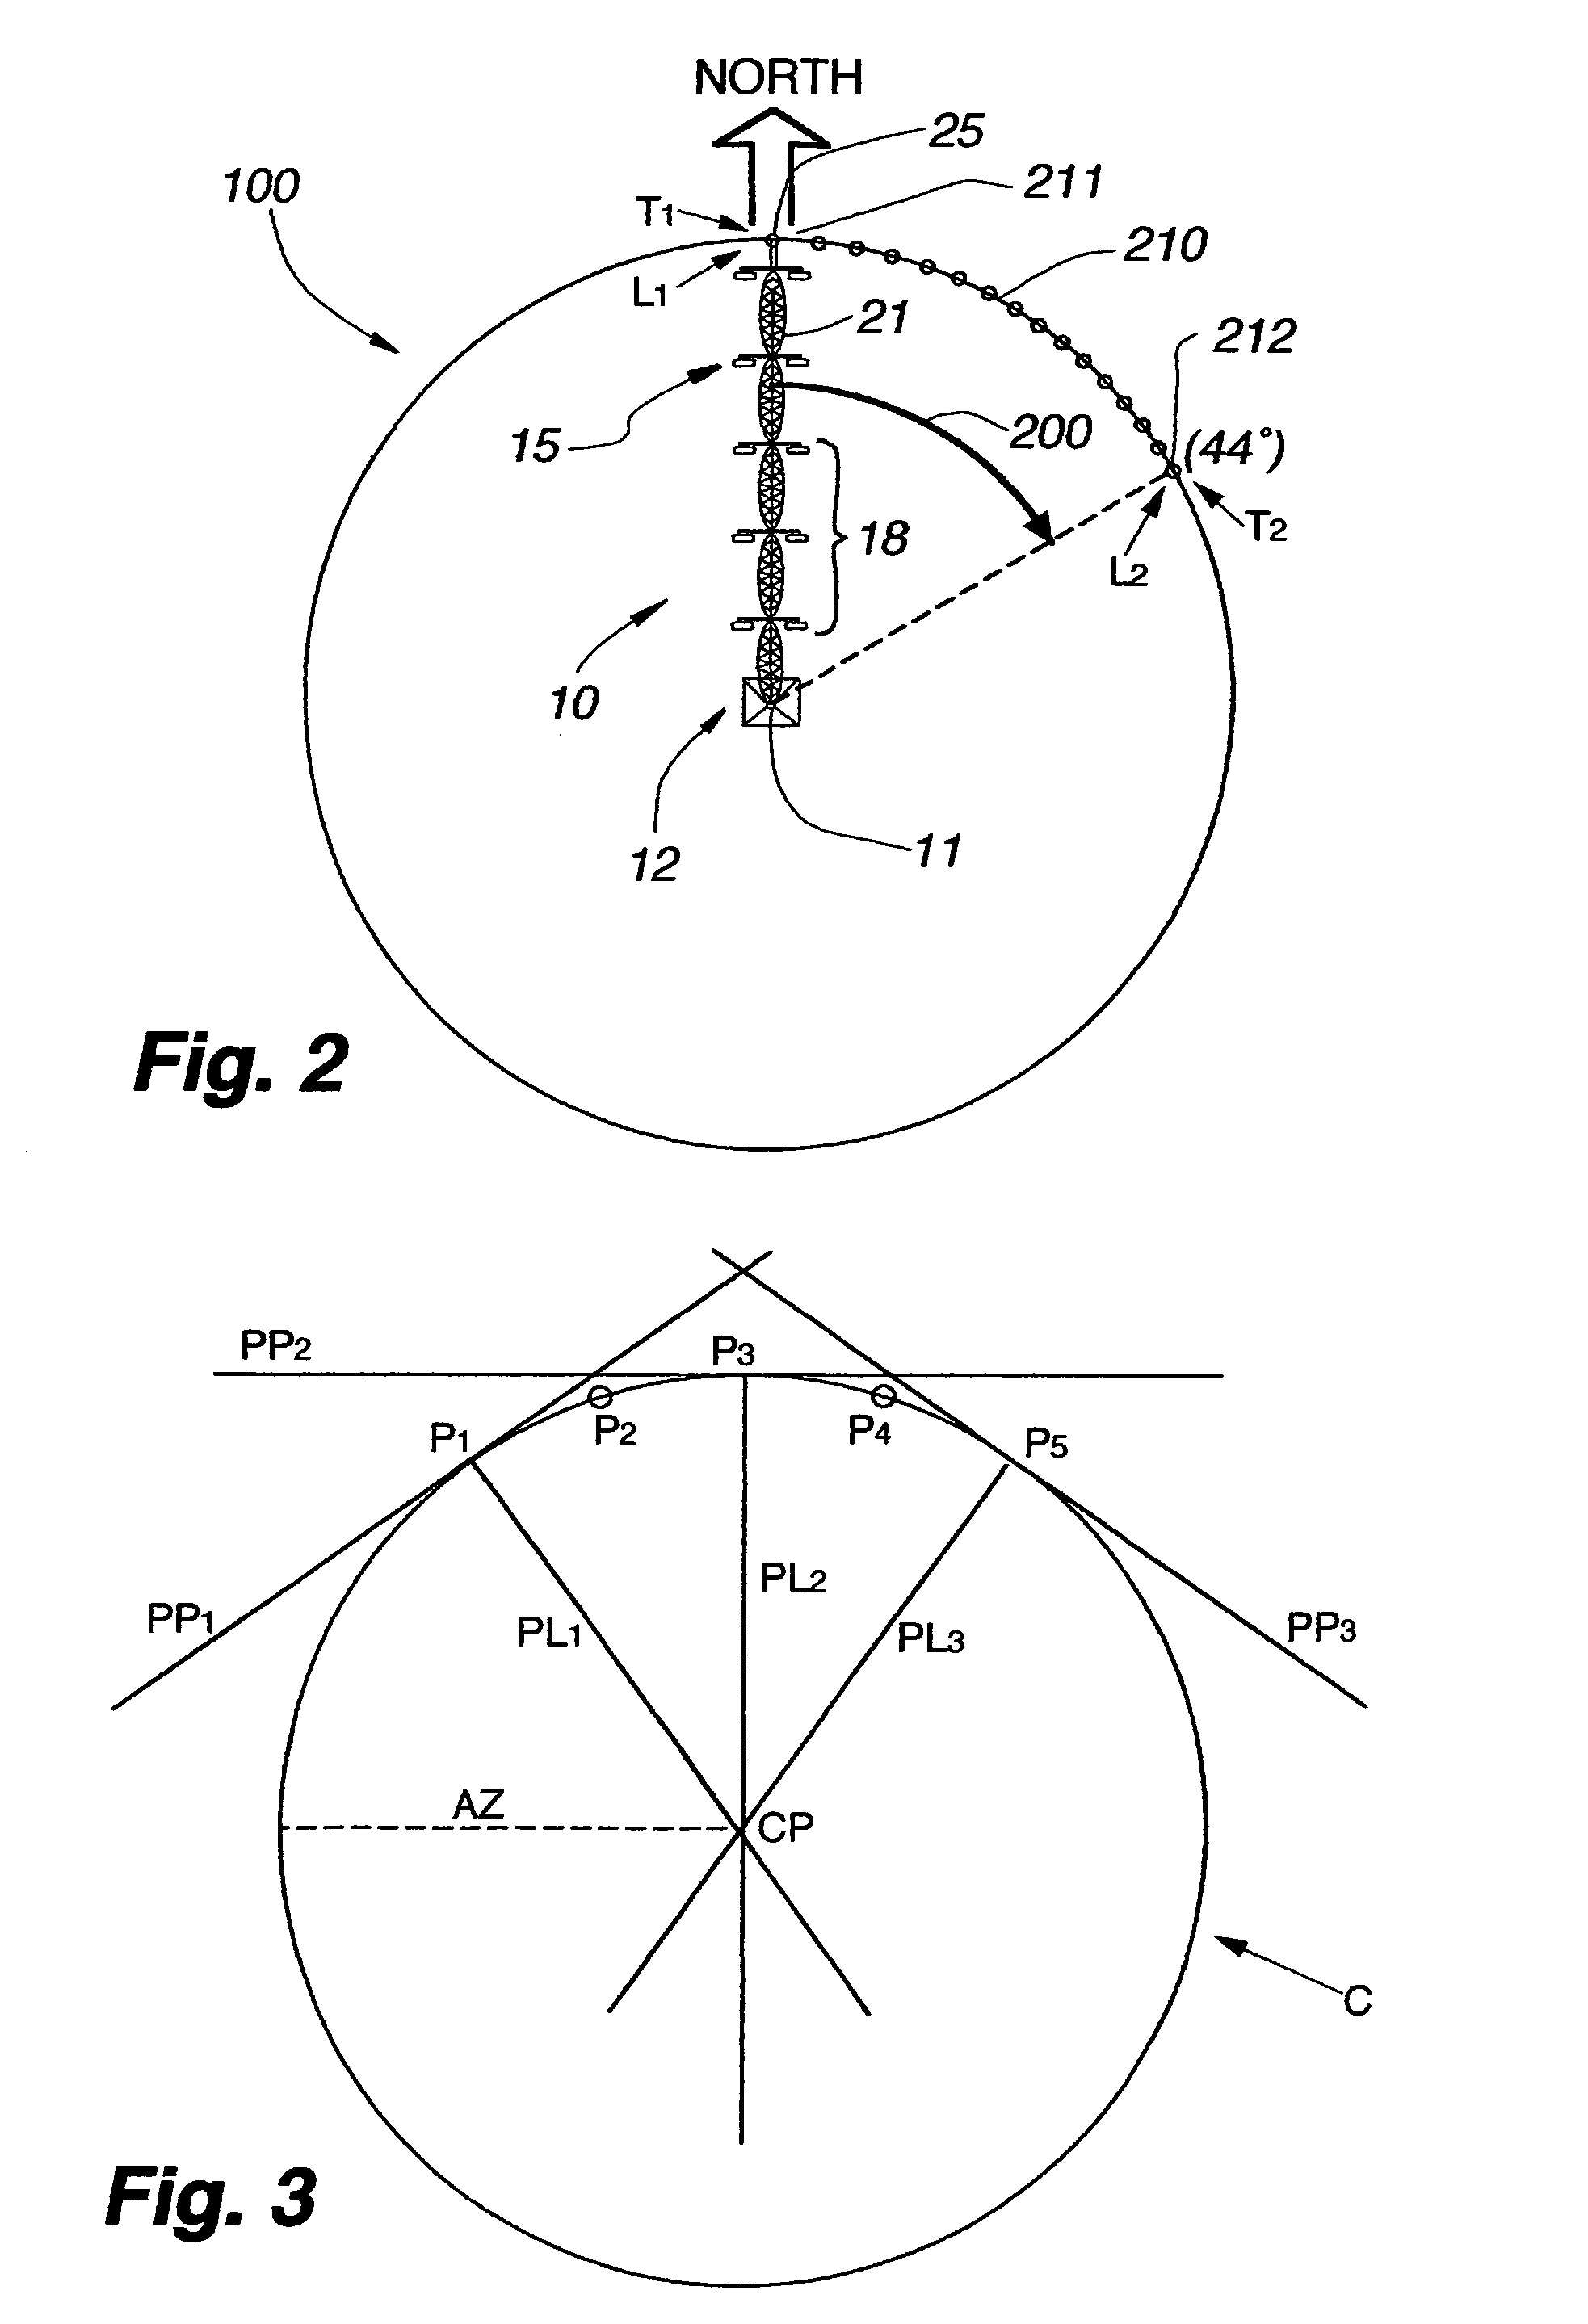 Universal remote terminal unit and method for tracking the position of self-propelled irrigation systems